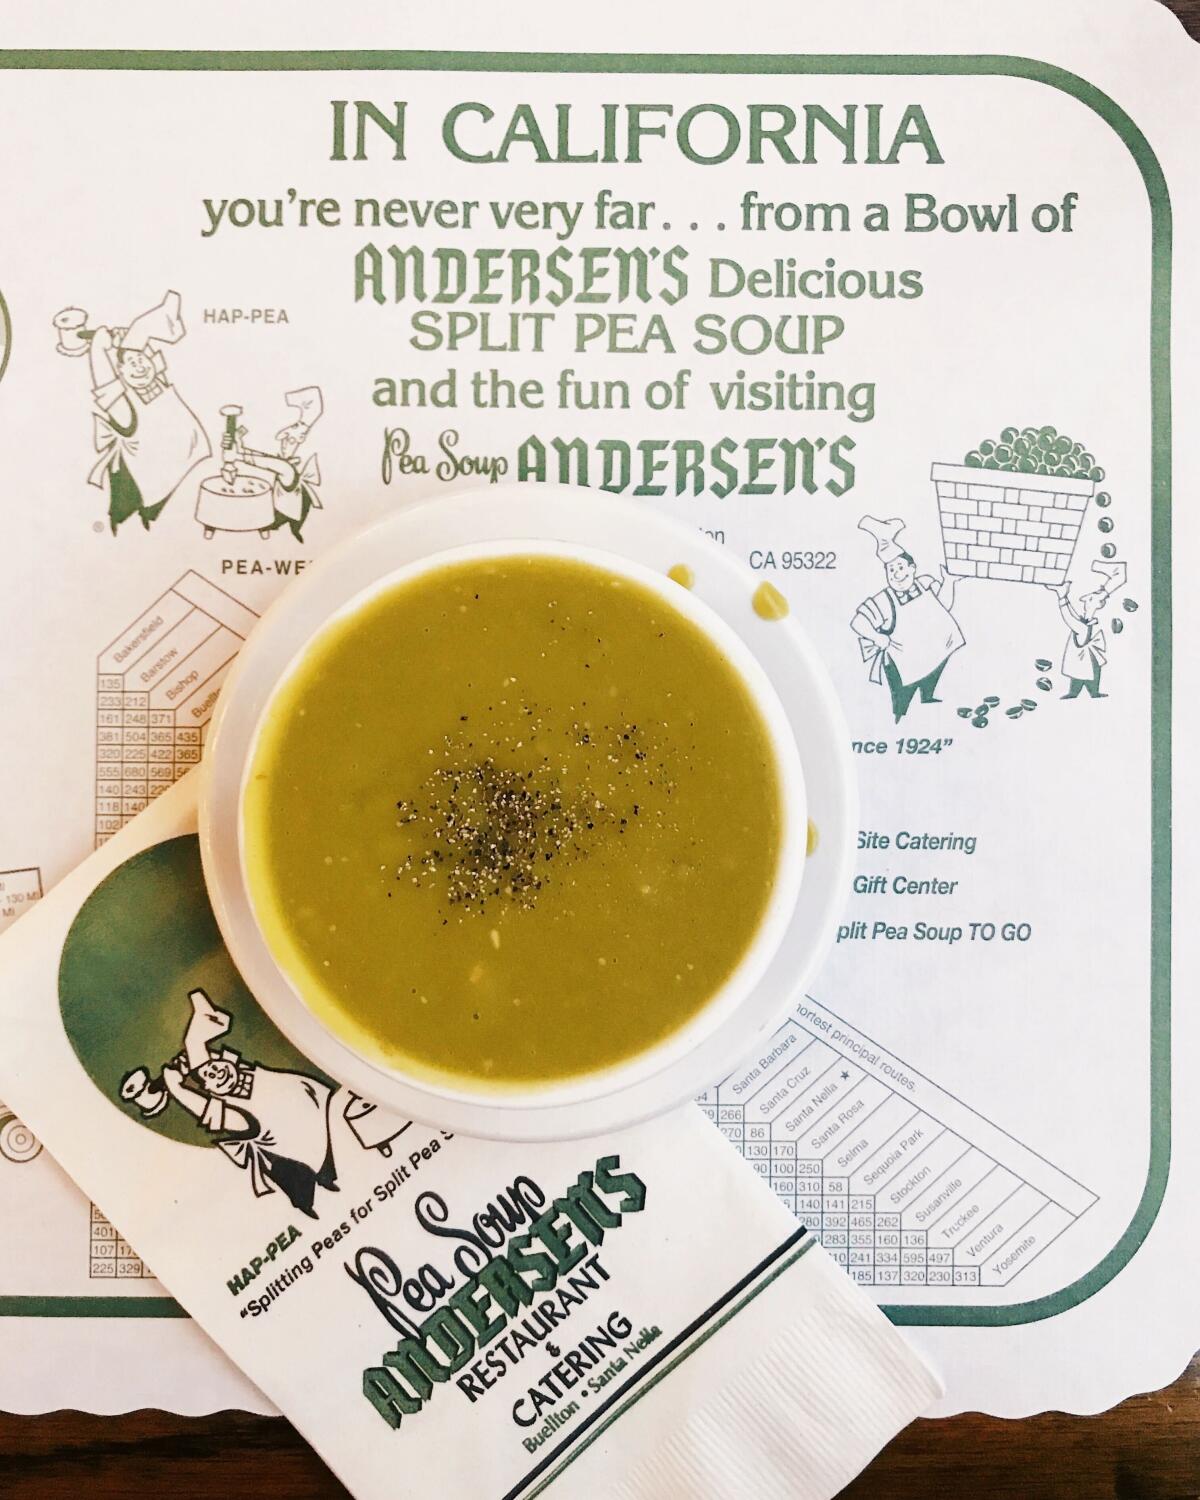 An overhead of a bowl of pea soup on branded paper placemat at the Buellton location of Pea Soup Andersen's.